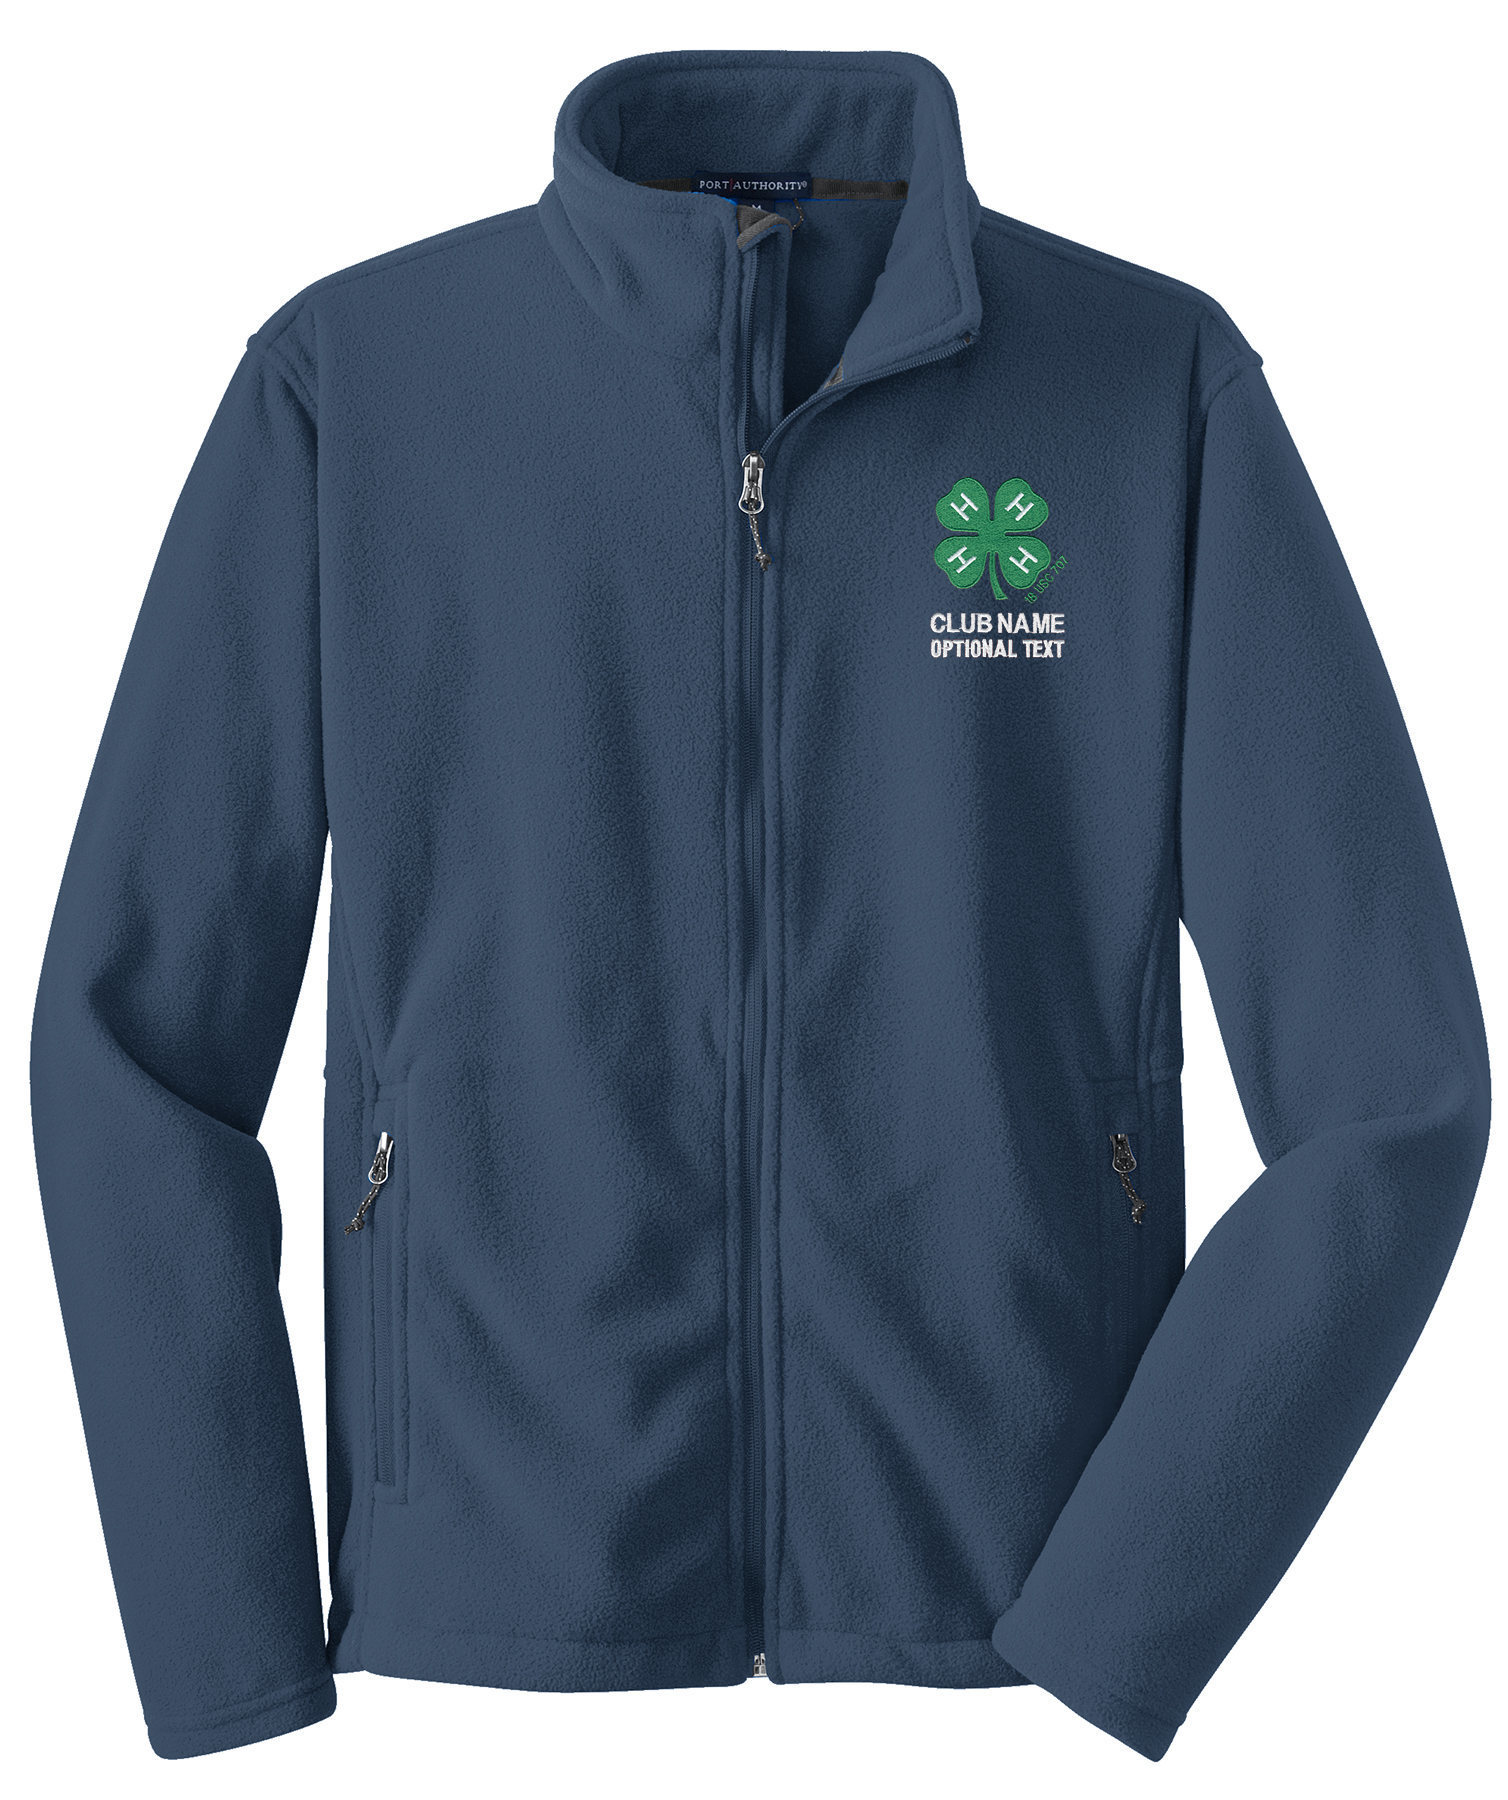 Port Authority Value Fleece Jacket with Embroidered 4-H Logo